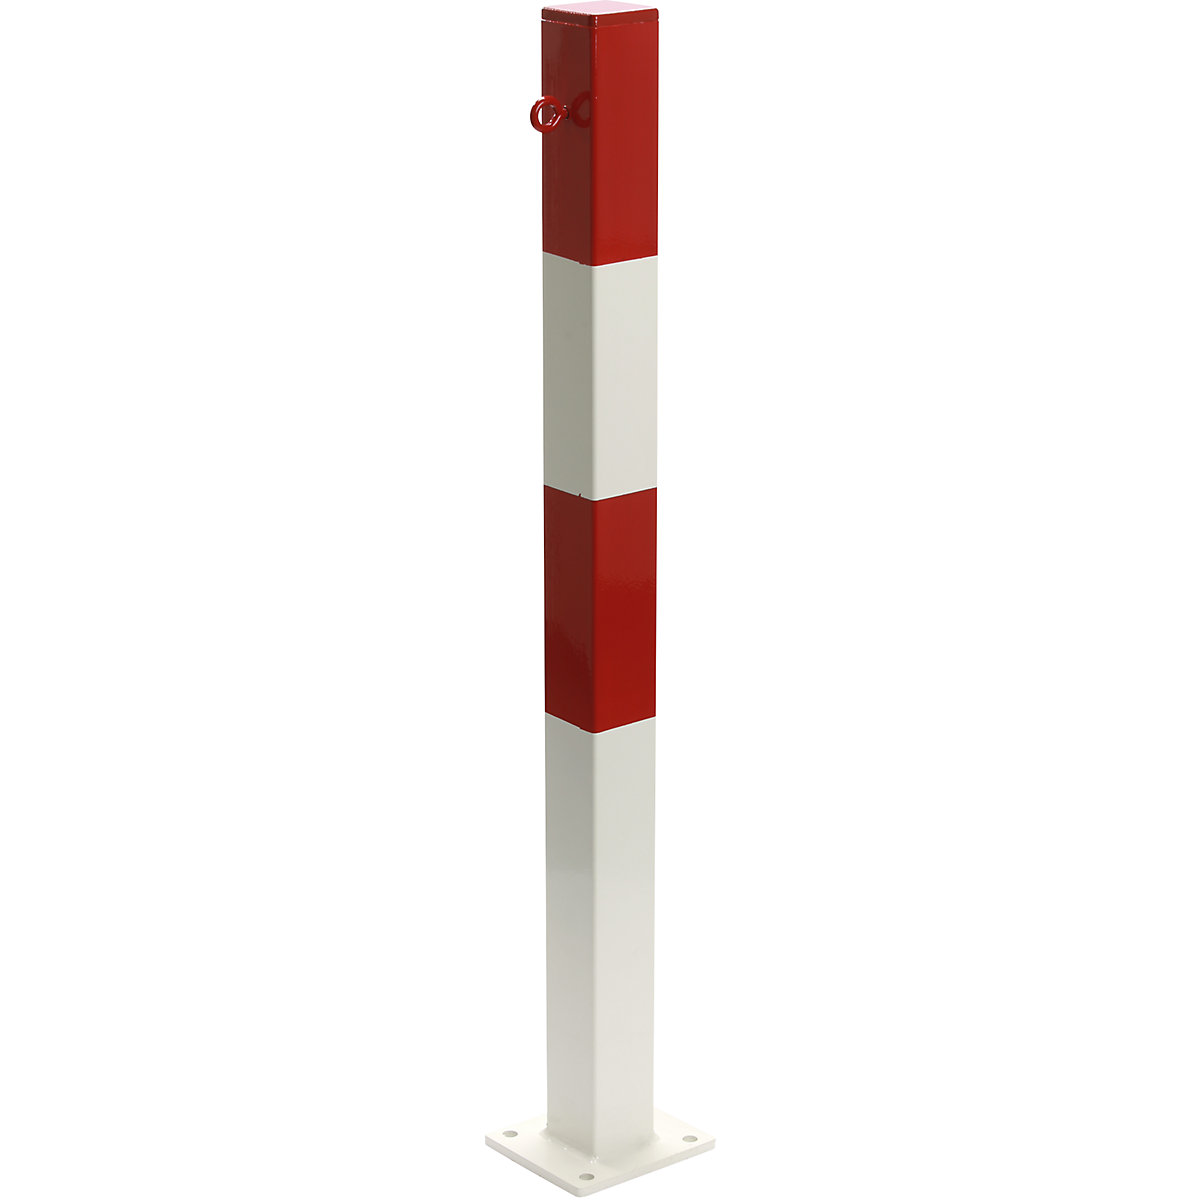 Barrier post, for bolting in place, 70 x 70 mm, red/white plastic coated, 1 eyelet-14